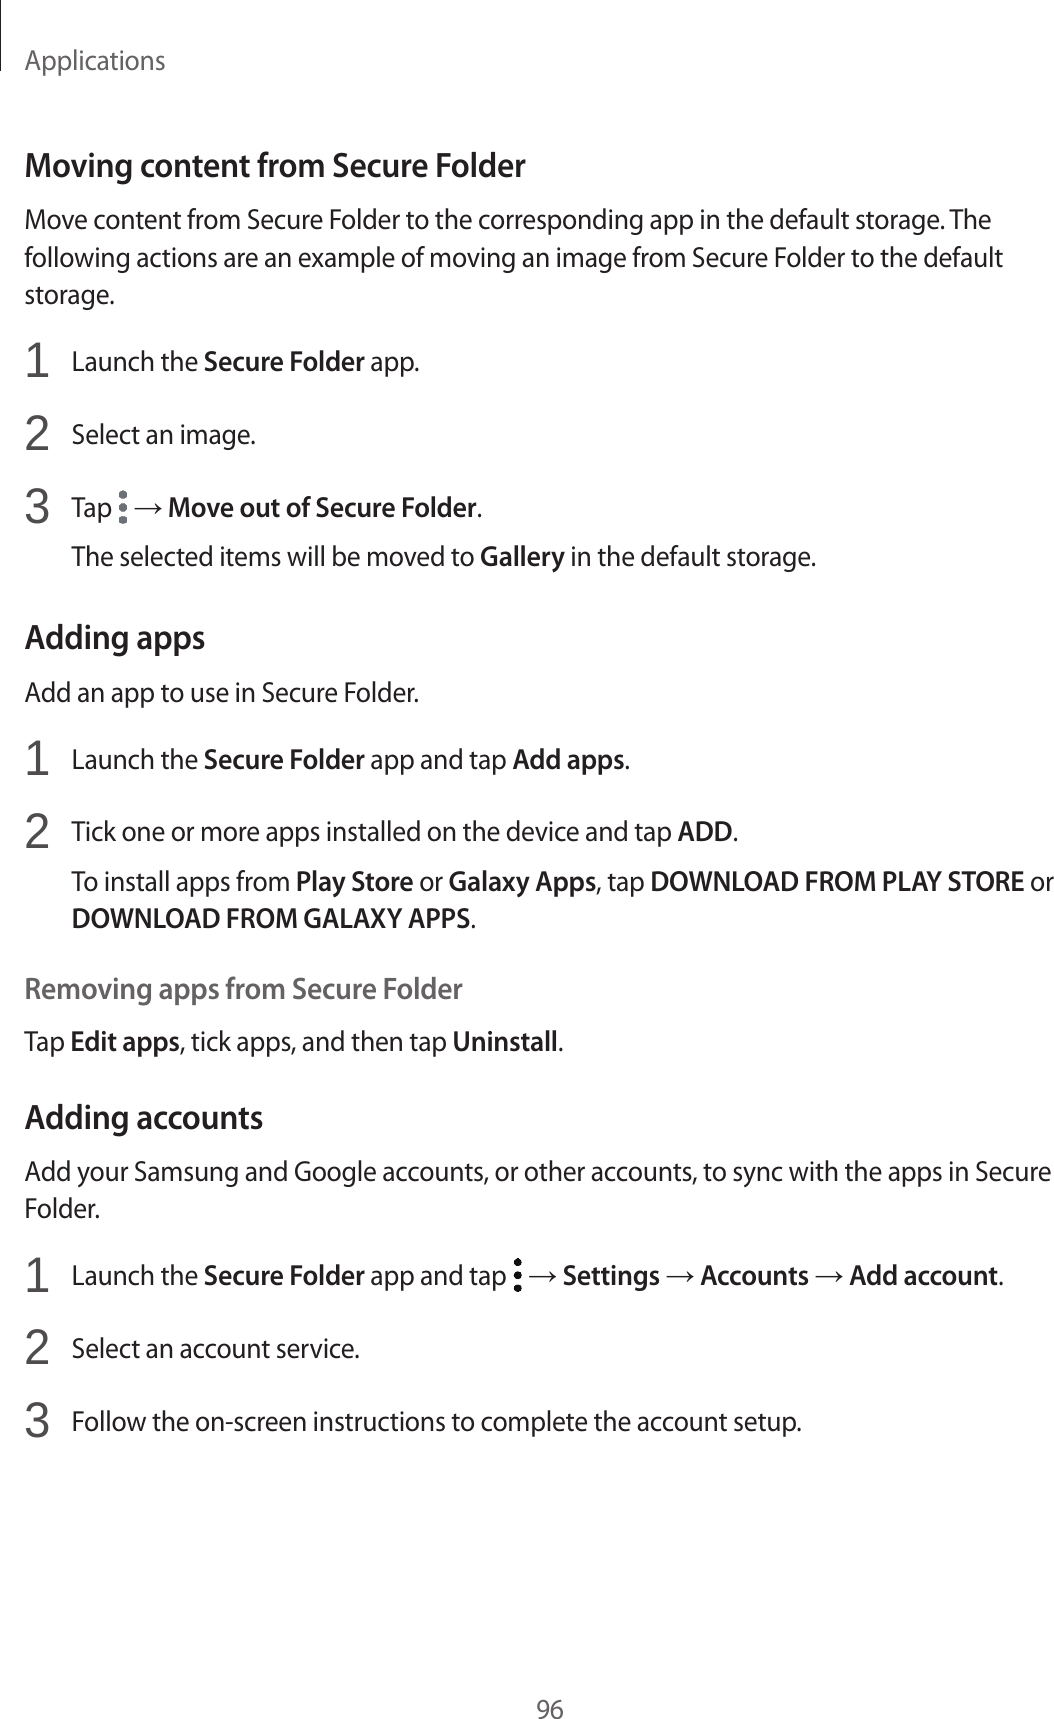 Applications96Moving content from Secure FolderMove content from Secure Folder to the corresponding app in the default storage. The following actions are an example of moving an image from Secure Folder to the default storage.1  Launch the Secure Folder app.2  Select an image.3  Tap   → Move out of Secure Folder.The selected items will be moved to Gallery in the default storage.Adding appsAdd an app to use in Secure Folder.1  Launch the Secure Folder app and tap Add apps.2  Tick one or more apps installed on the device and tap ADD.To install apps from Play Store or Galaxy Apps, tap DOWNLOAD FROM PLAY STORE or DOWNLOAD FROM GALAXY APPS.Removing apps from Secure FolderTap Edit apps, tick apps, and then tap Uninstall.Adding accountsAdd your Samsung and Google accounts, or other accounts, to sync with the apps in Secure Folder.1  Launch the Secure Folder app and tap   → Settings → Accounts → Add account.2  Select an account service.3  Follow the on-screen instructions to complete the account setup.